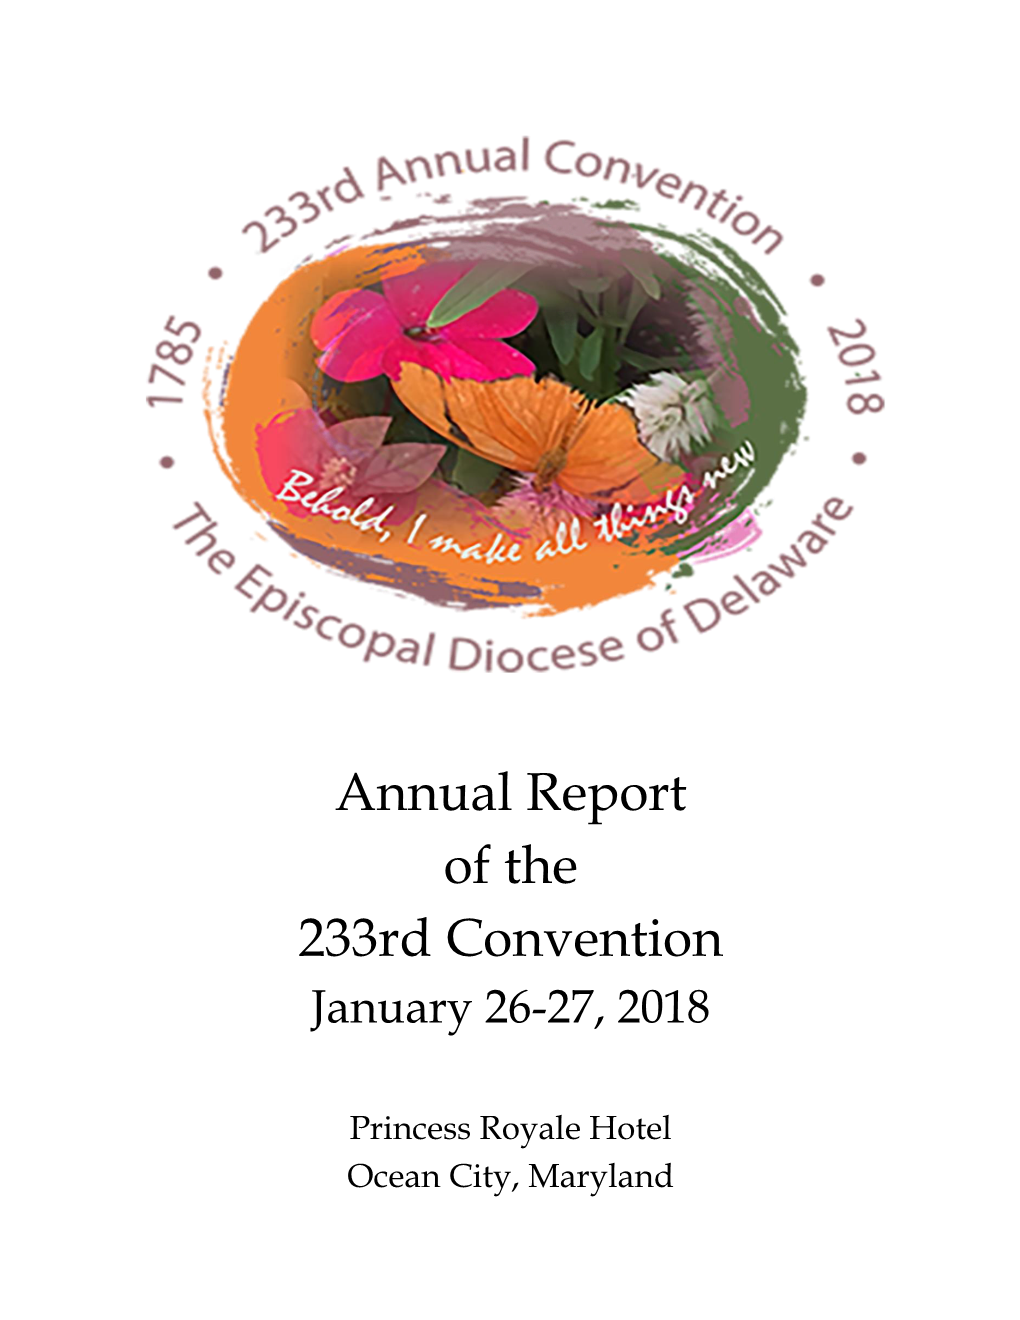 Annual Report of the 233Rd Convention January 26-27, 2018